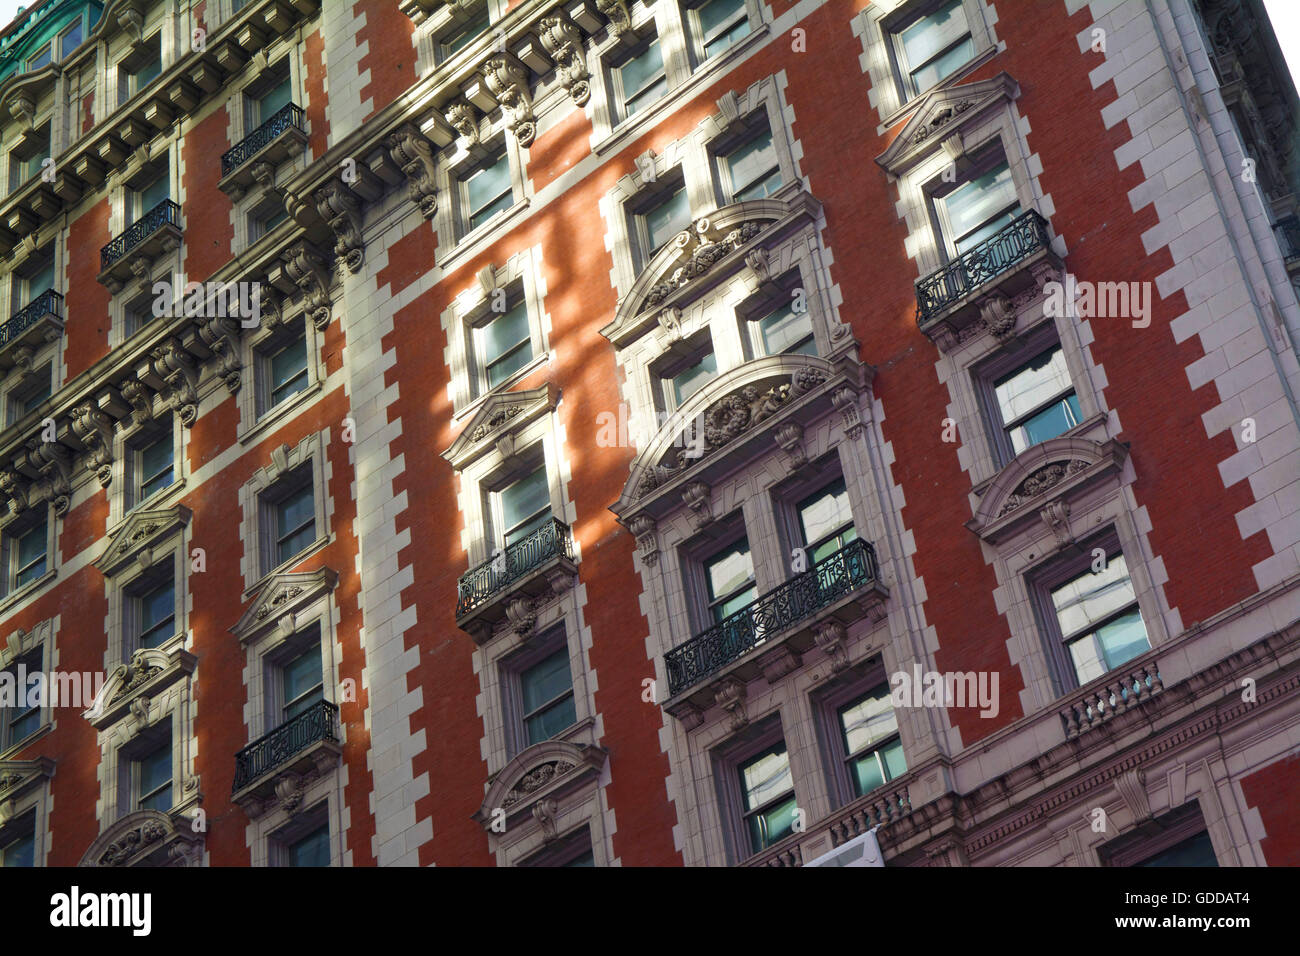 The side view of an orange and white bricked Manhattan, New York apartment building with rustic ornate and Victorian design Stock Photo